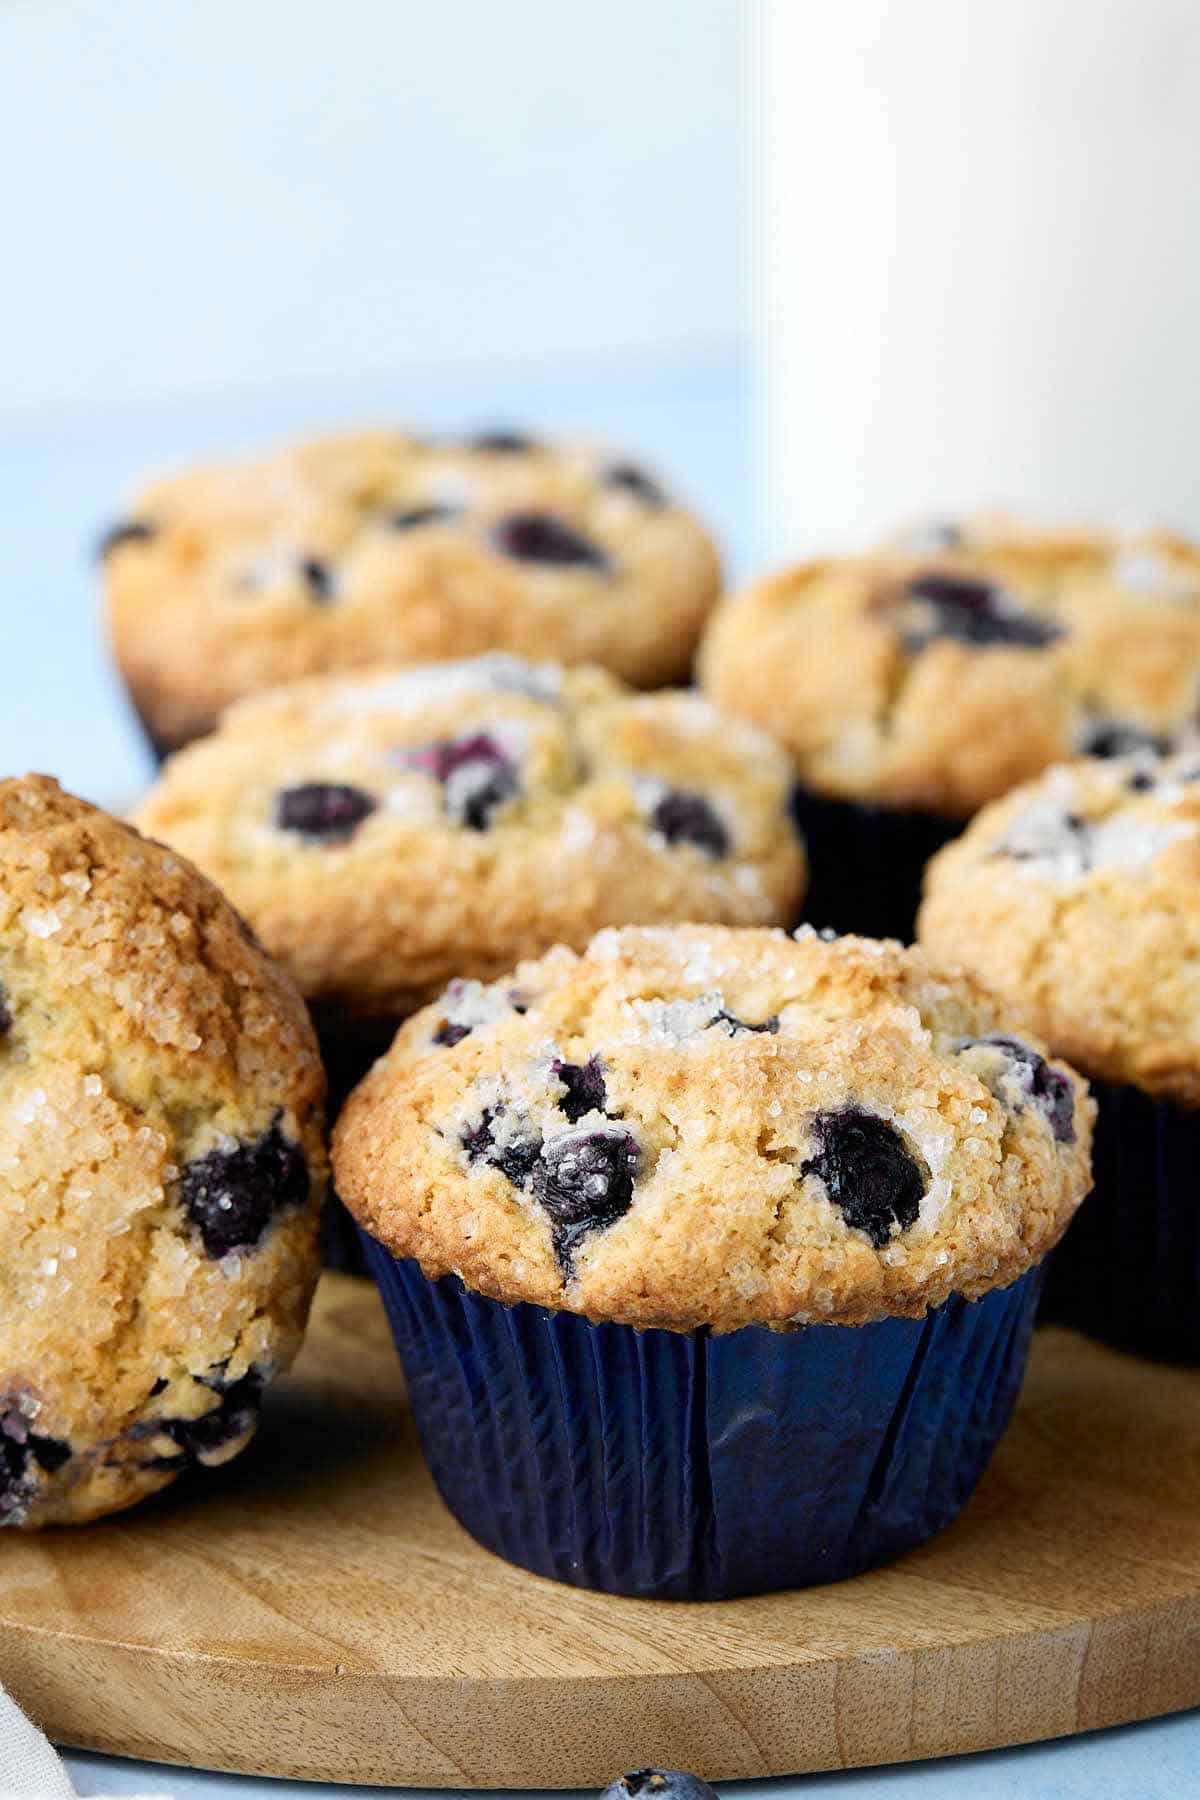 Jumbo blueberry buttermilk muffins on a wooden tray.